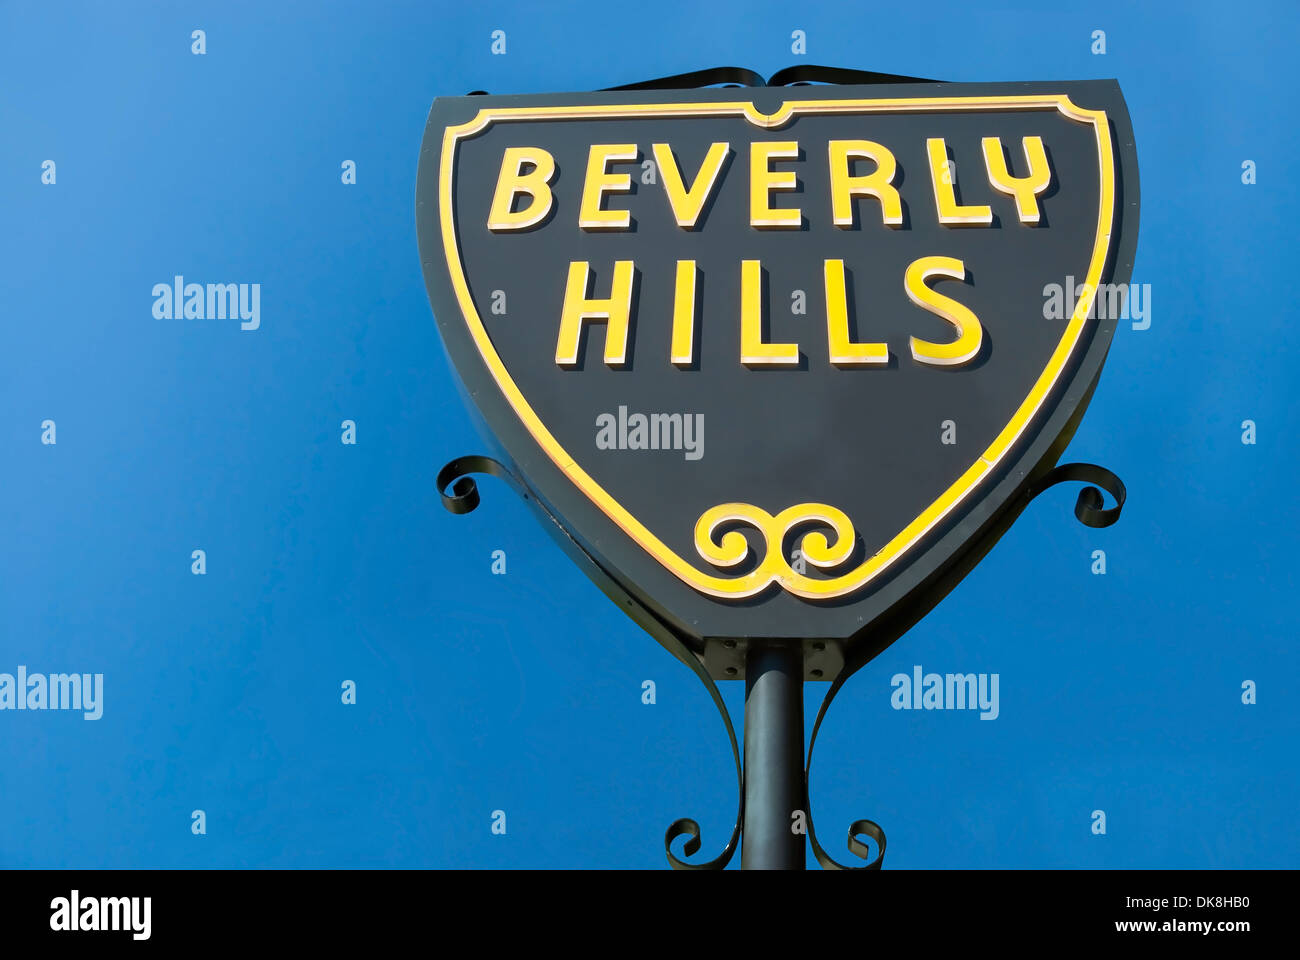 Beverly Hills sign in Los Angeles park with beautiful blue sky in background Stock Photo